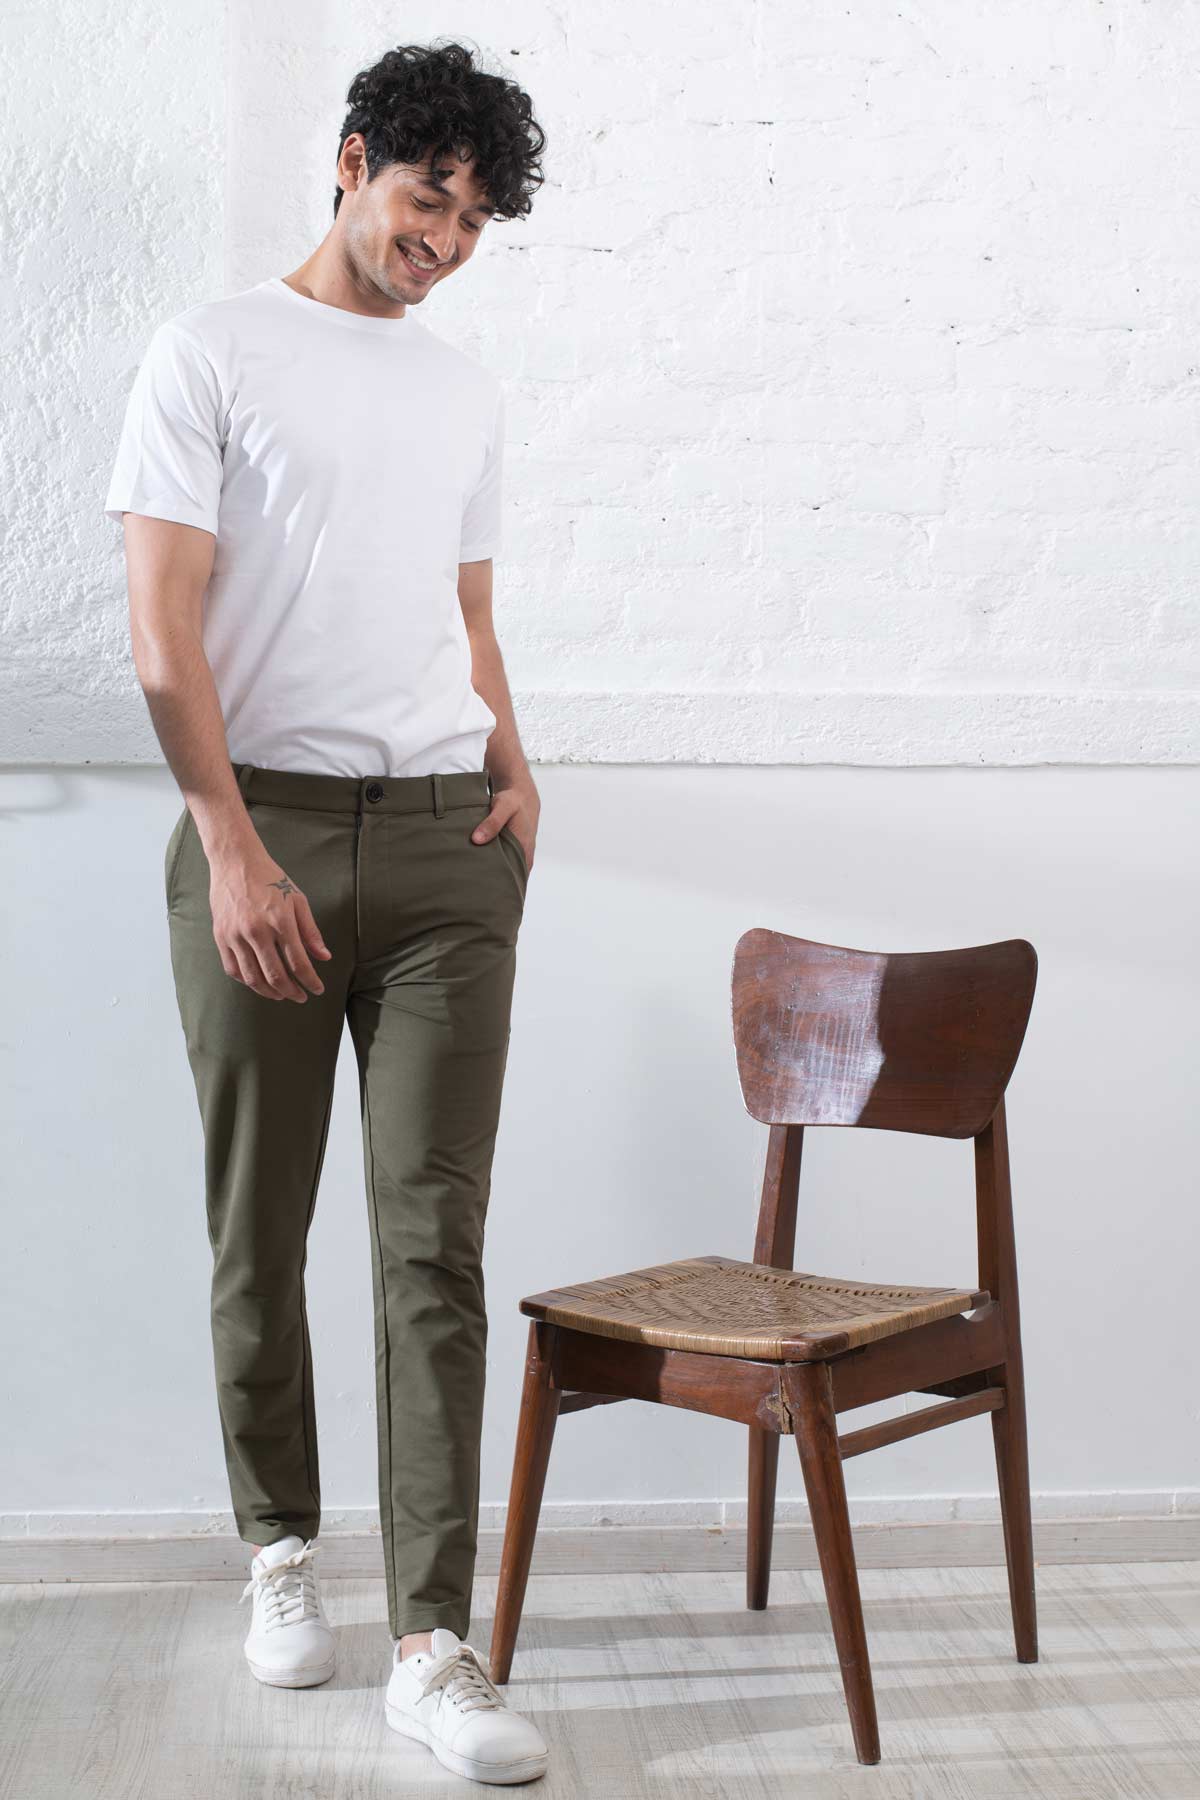 25 Green pants outfit men ideas  mens outfits green pants mens fashion